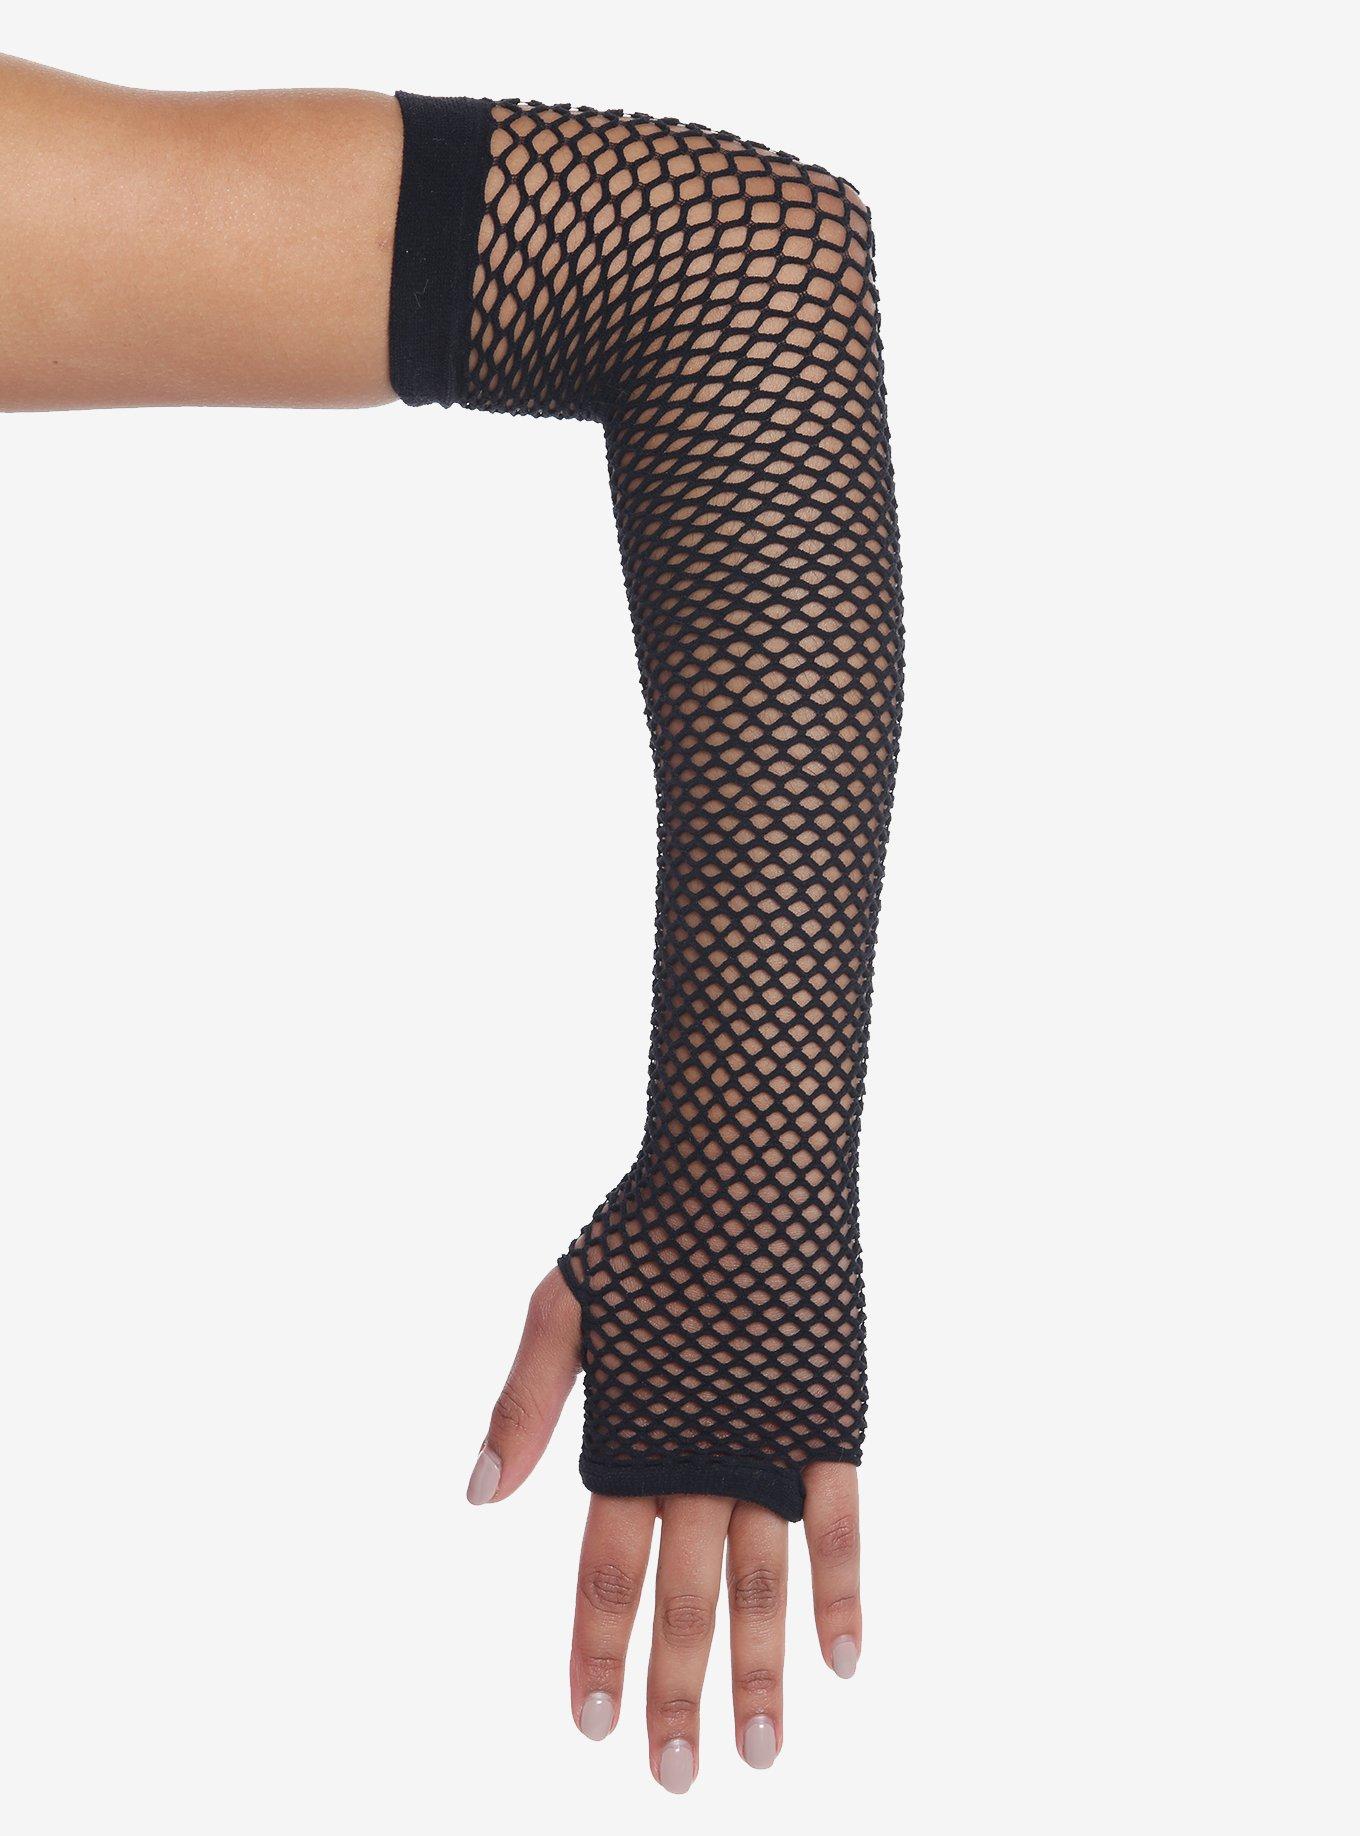  Black Long Fishnet Fingerless Gloves - 1 Count - Vibrant,  Stretchy & Stylish - Perfect For Parties & Costumes, One Size Fits All :  Clothing, Shoes & Jewelry